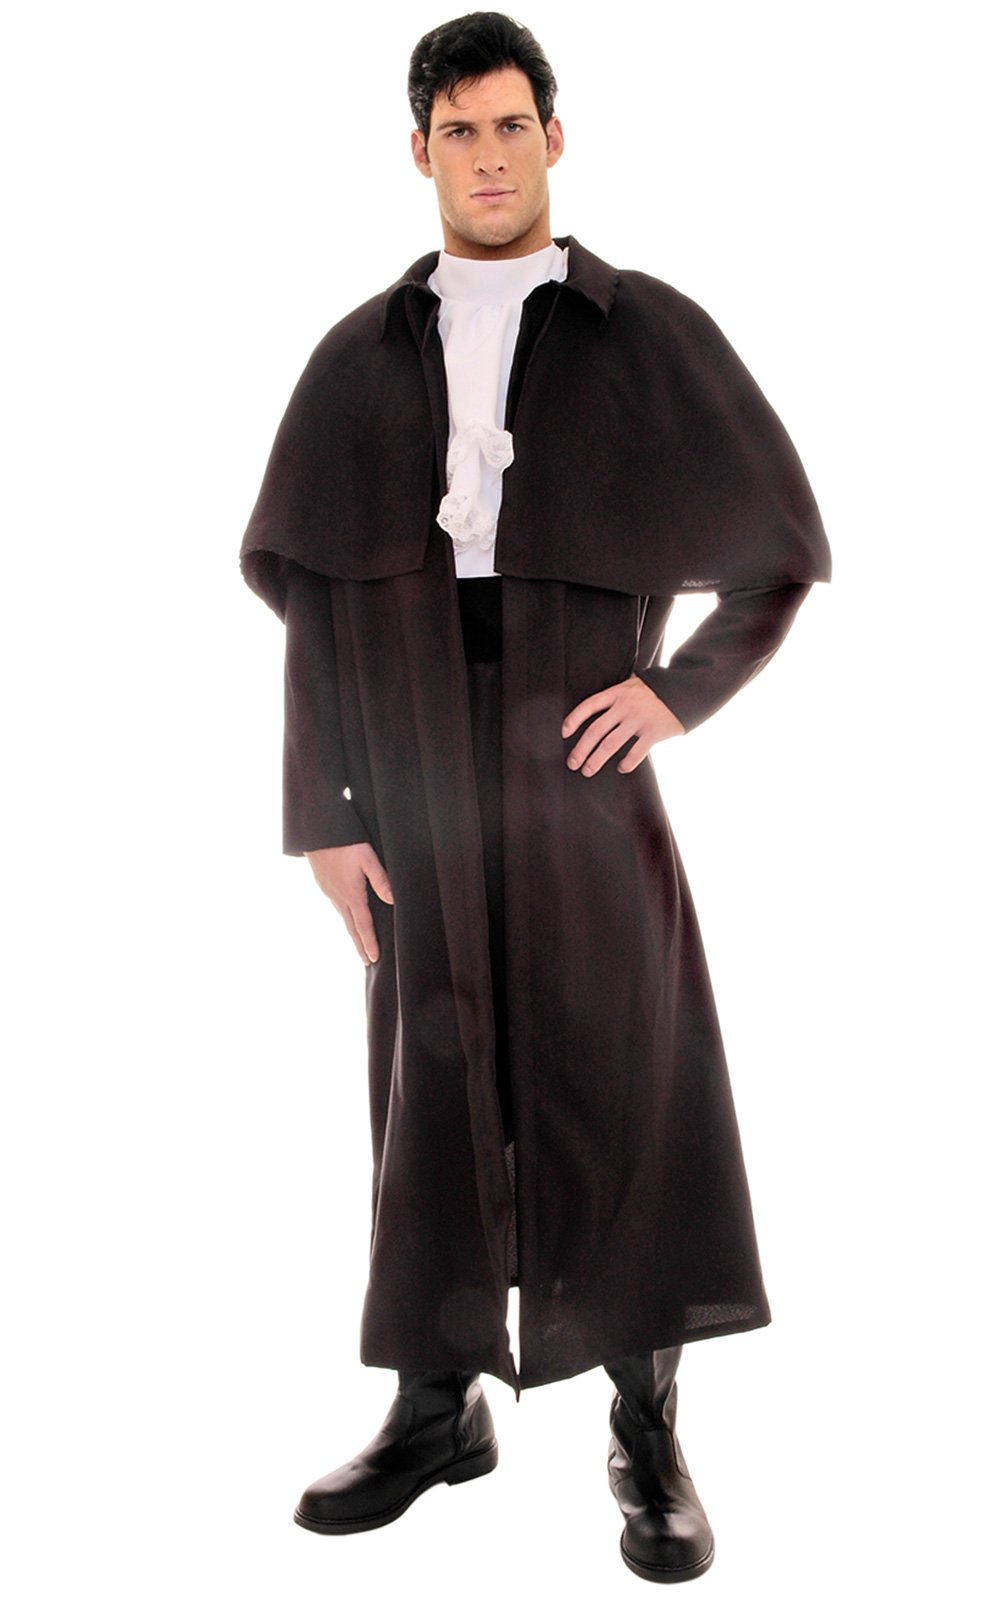 Plus Size Caesar Costume - In Stock : About Costume Shop